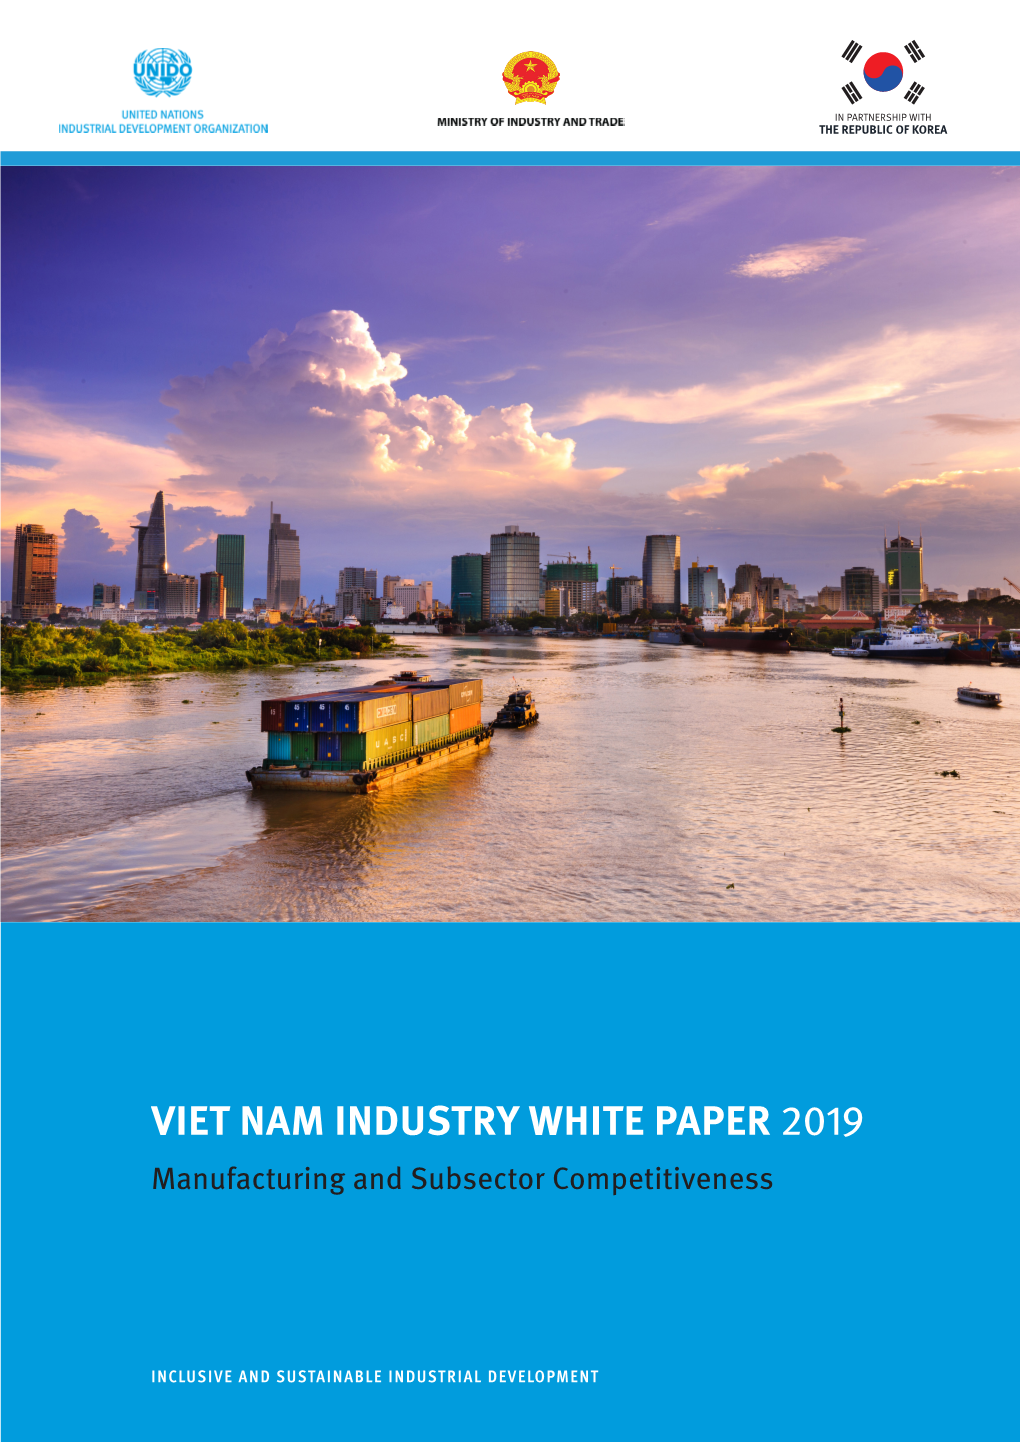 VIET NAM INDUSTRY WHITE PAPER 2019 Manufacturing and Subsector Competitiveness